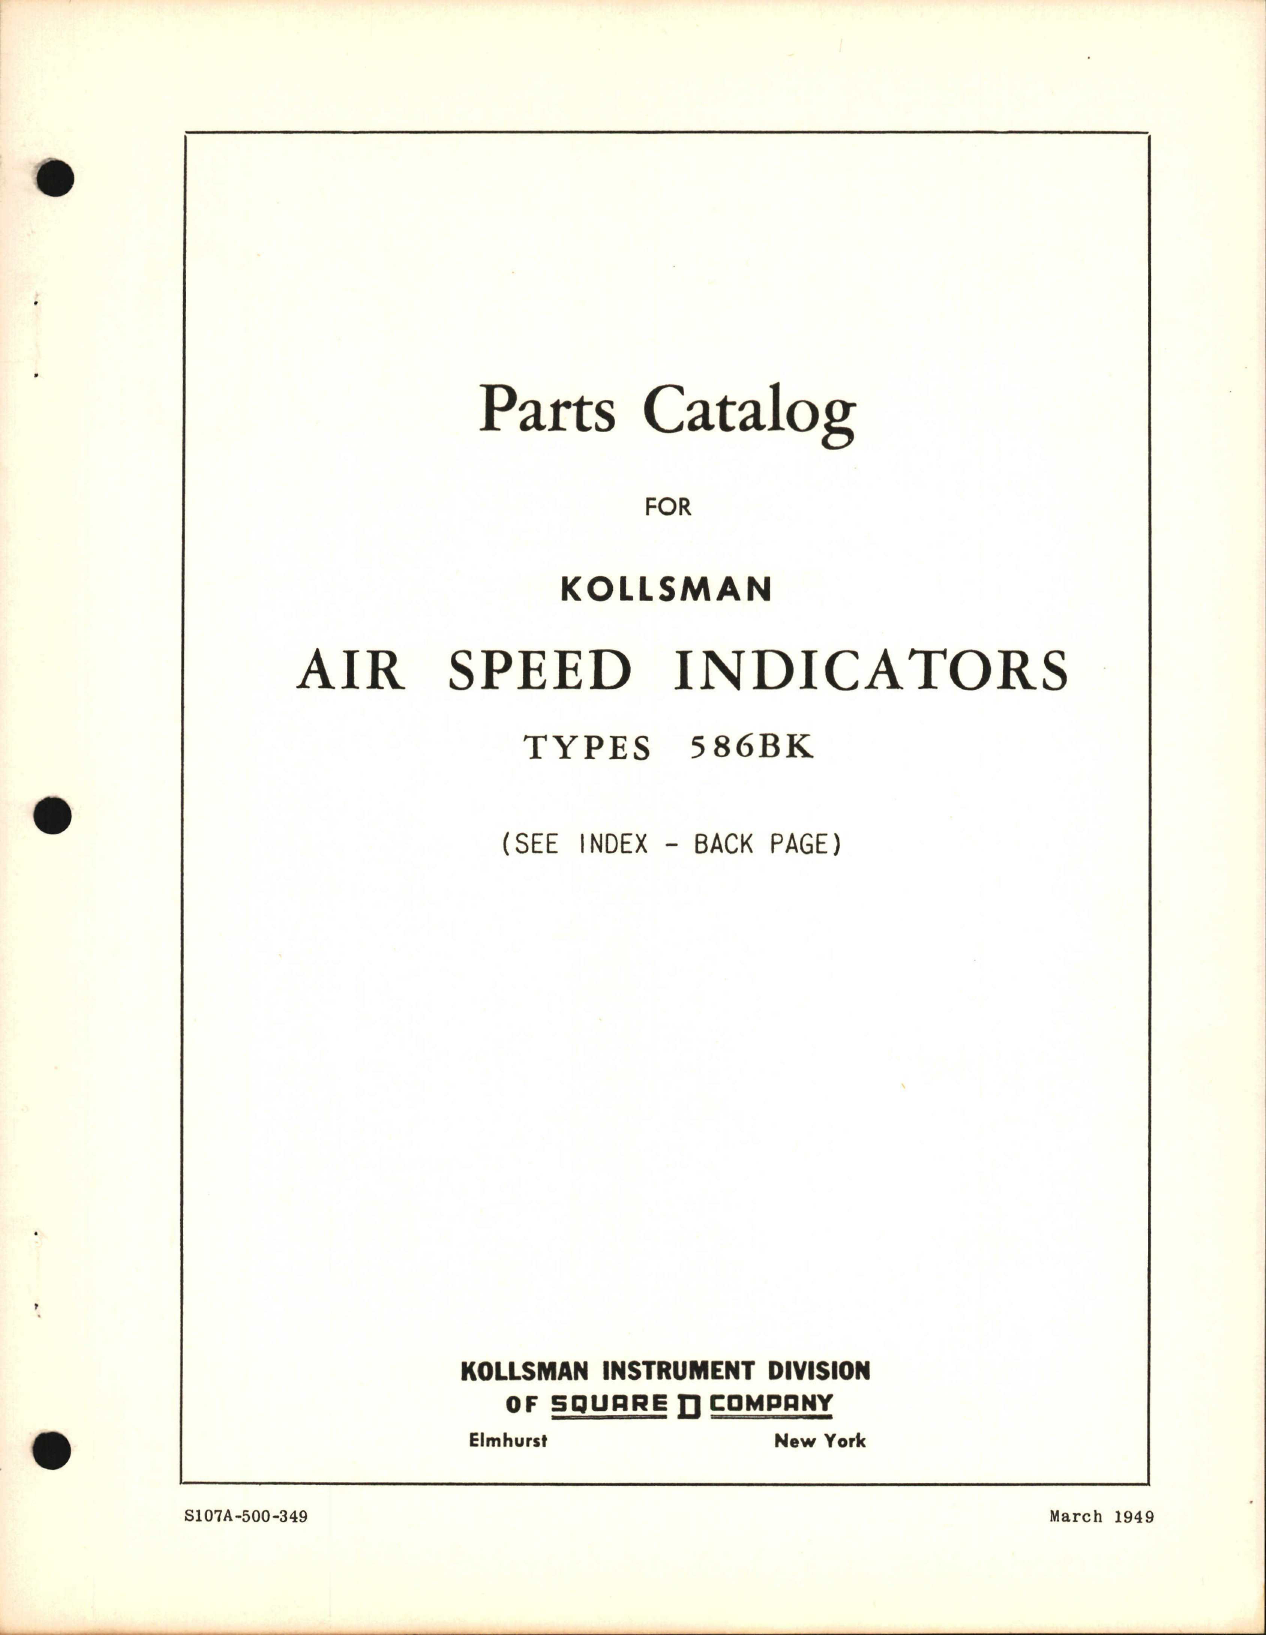 Sample page 1 from AirCorps Library document: Parts Catalog for Kollsman Air Speed Indicators Types 586BK